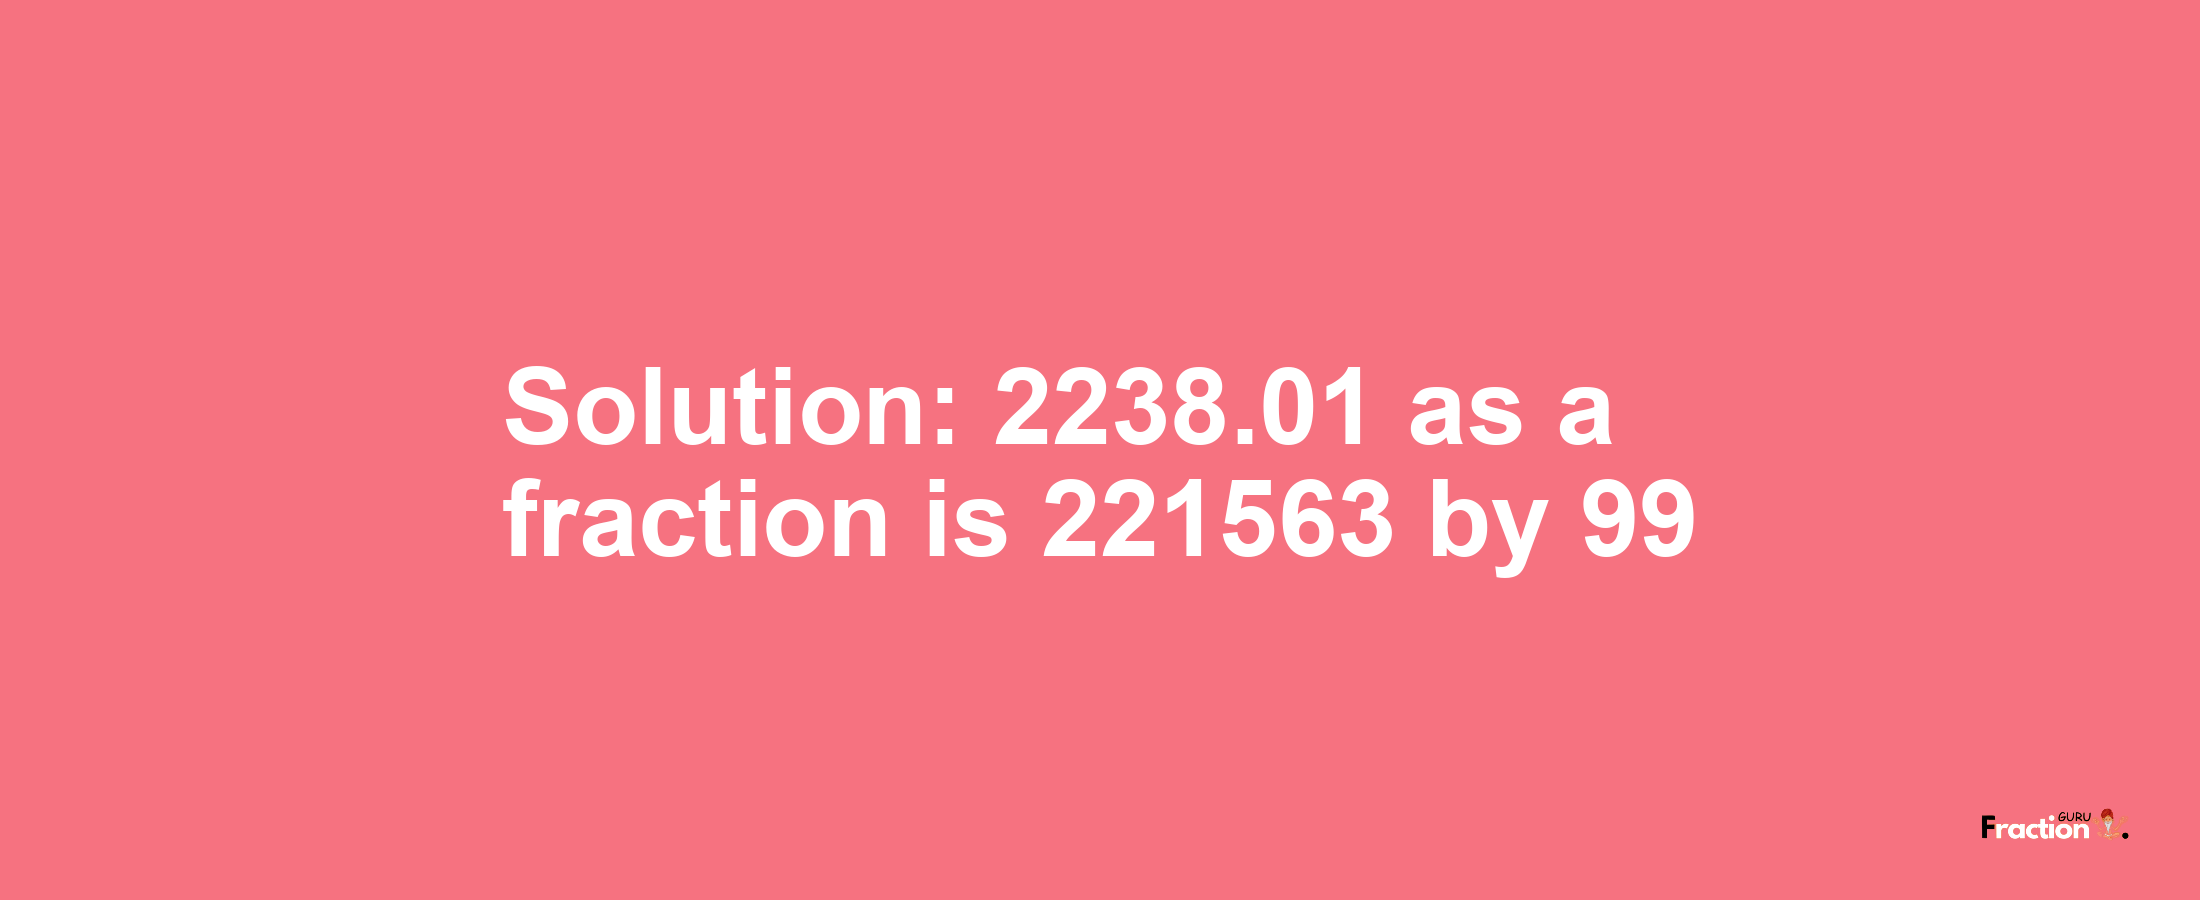 Solution:2238.01 as a fraction is 221563/99